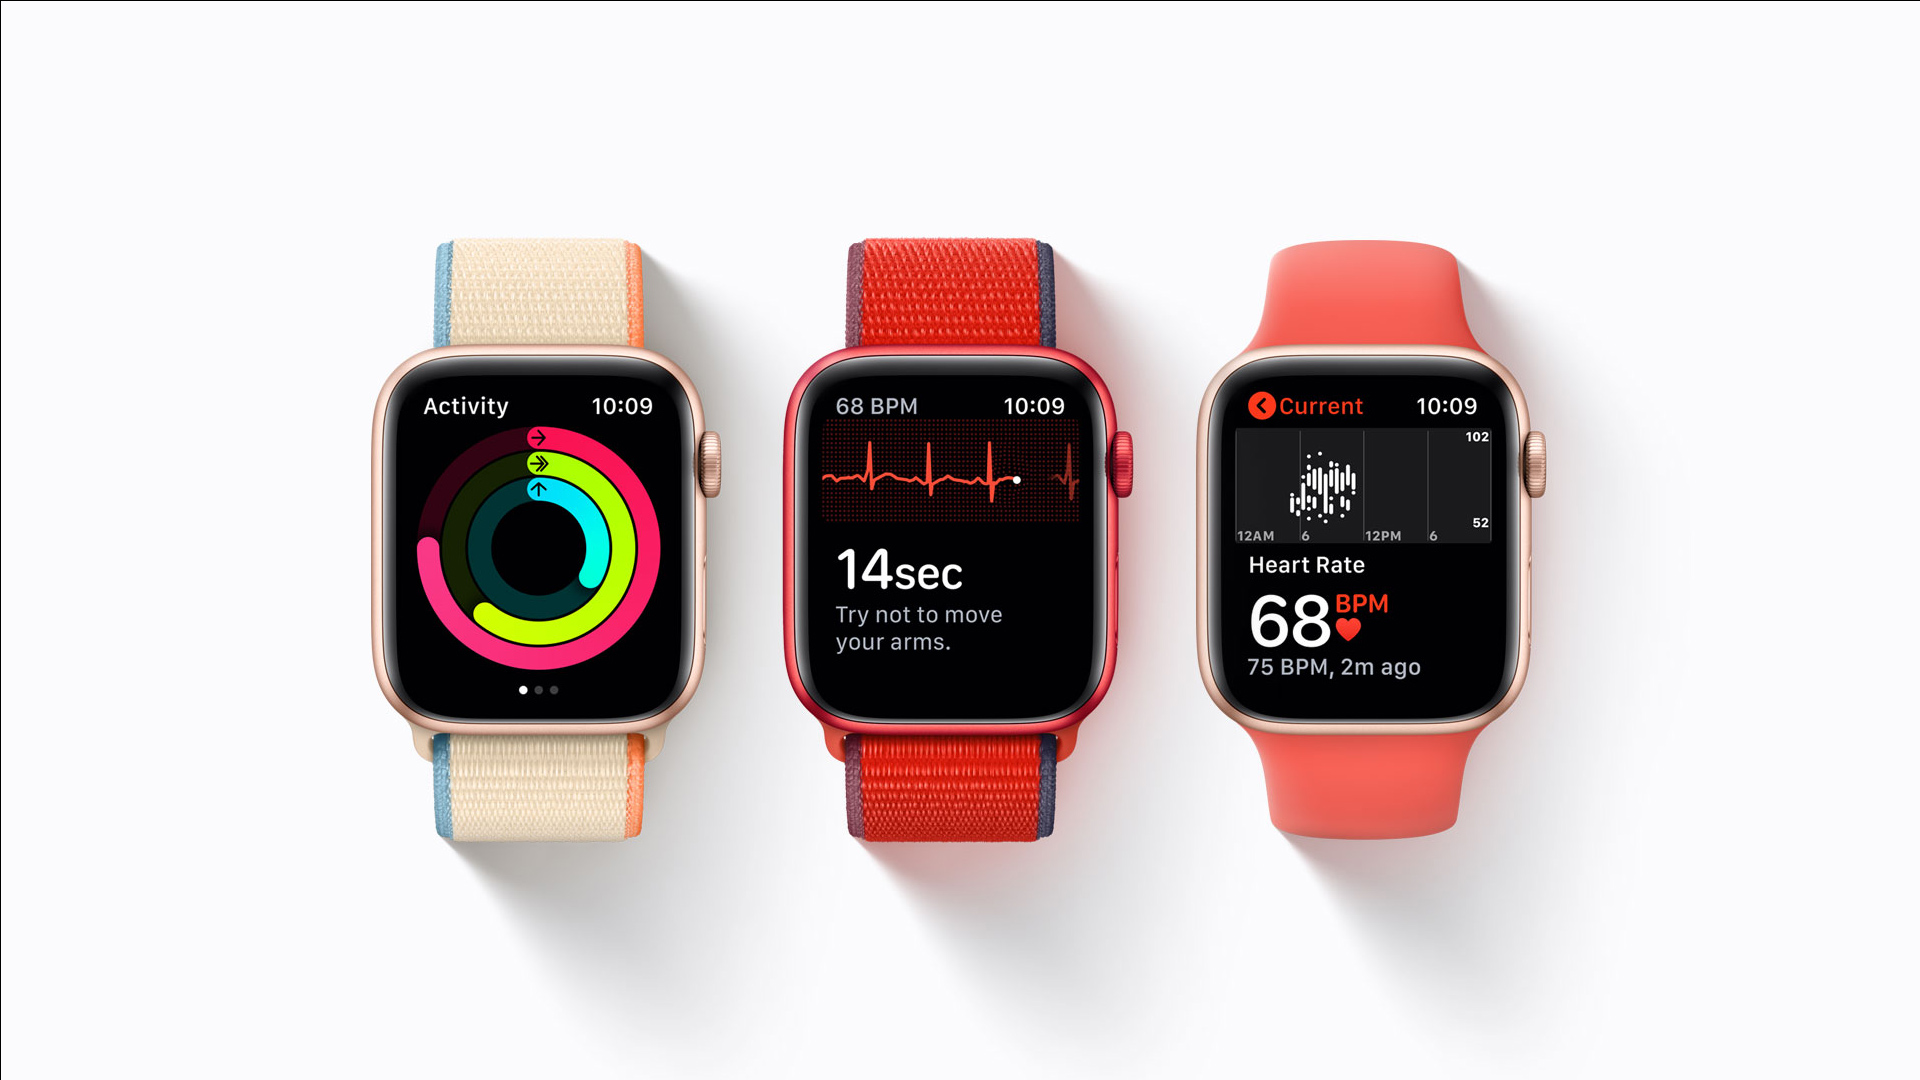 Apple Watch Series 6: History, specs, pricing, review, and deals